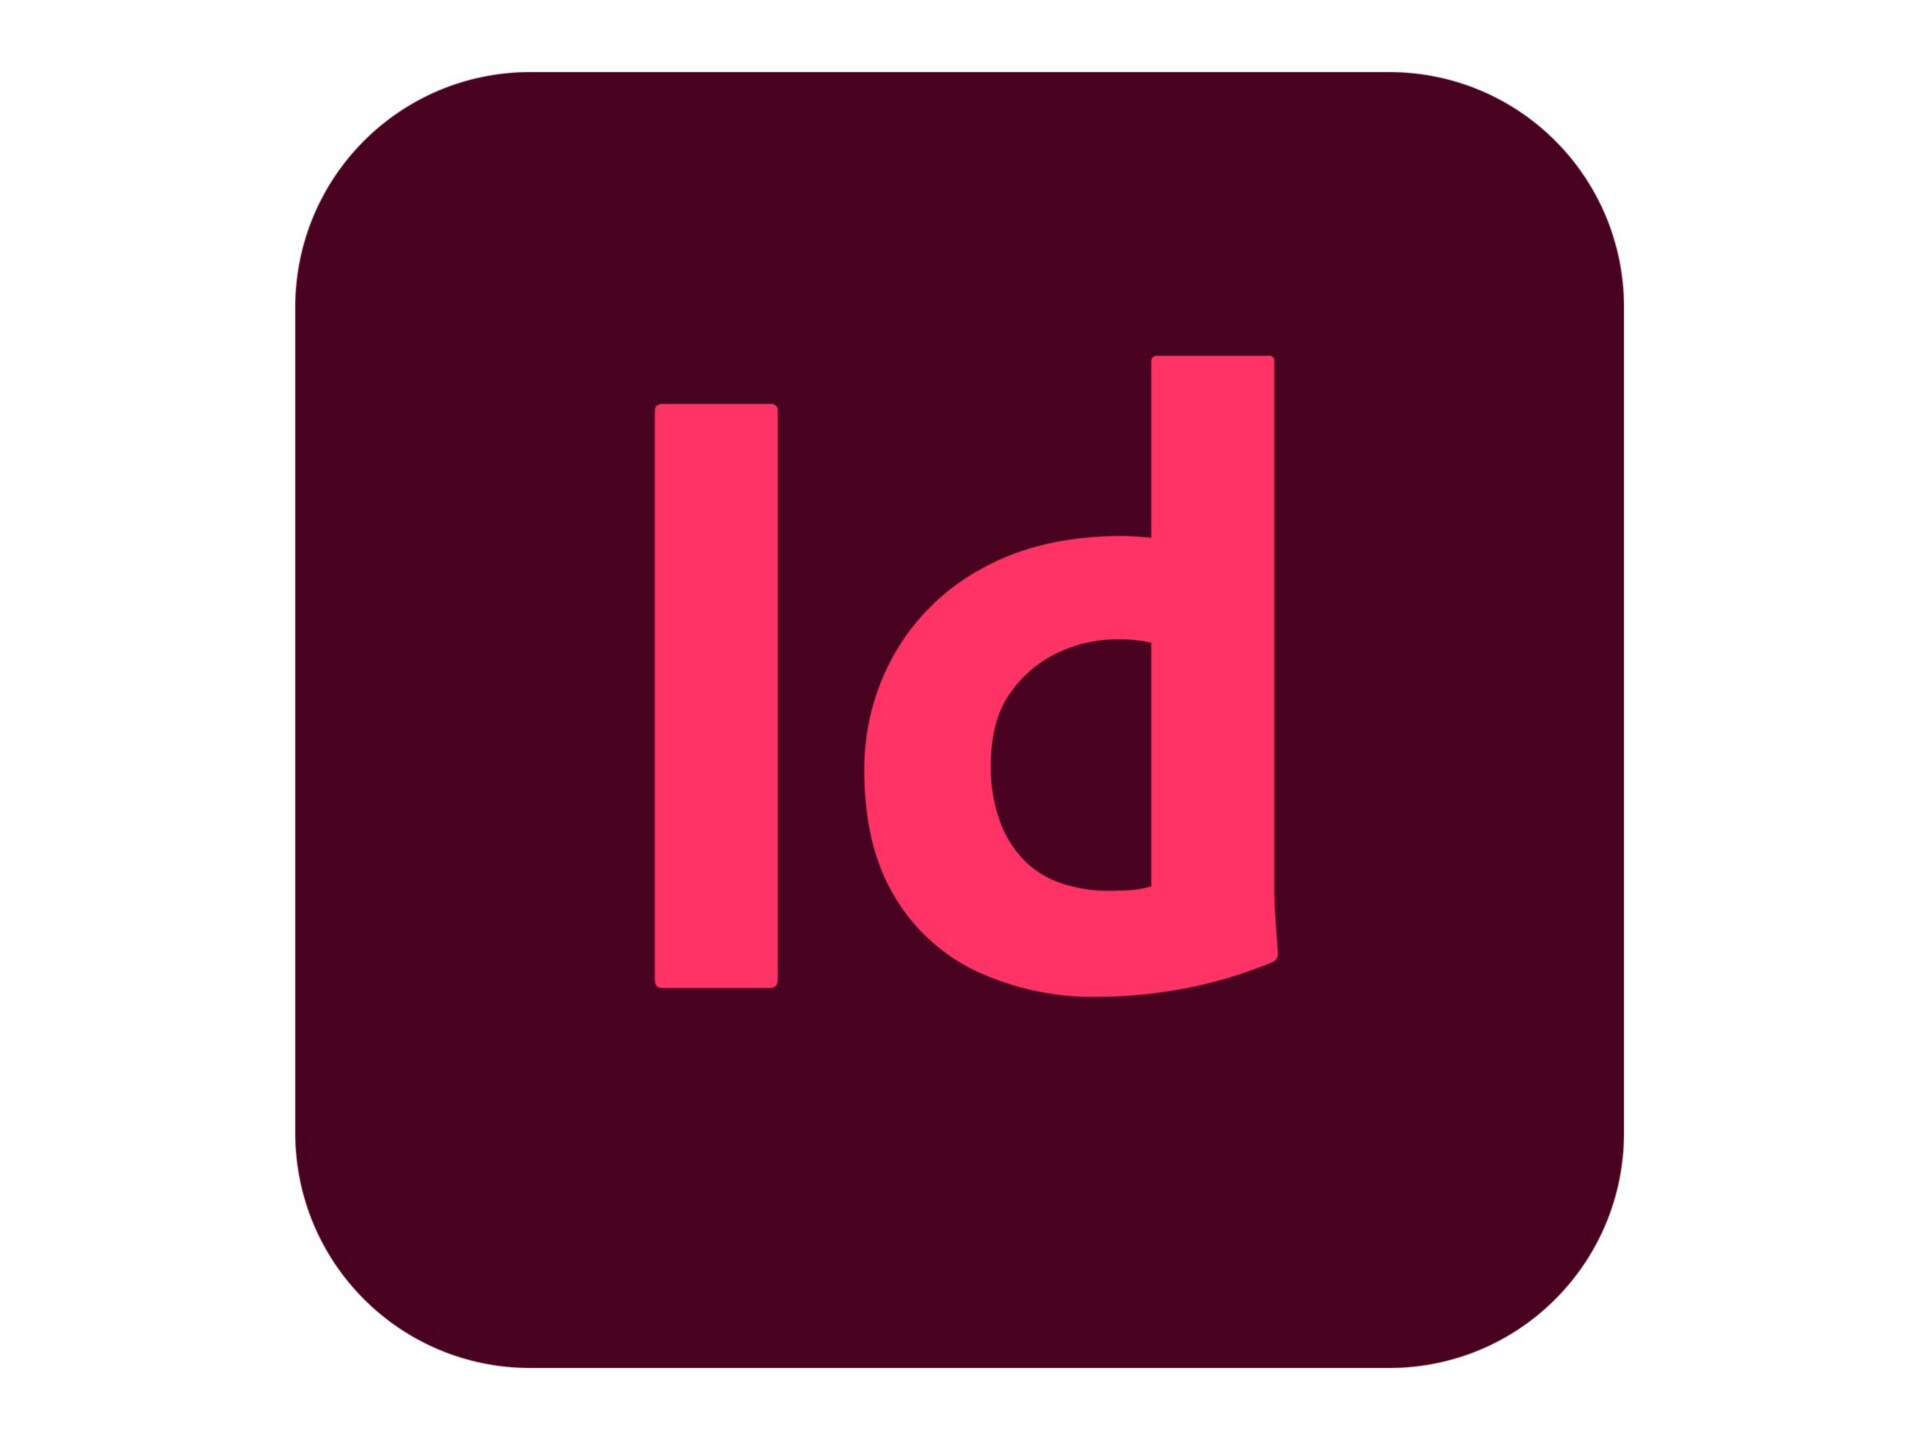 Adobe InDesign CC for teams - Subscription New (35 months) - 1 named user